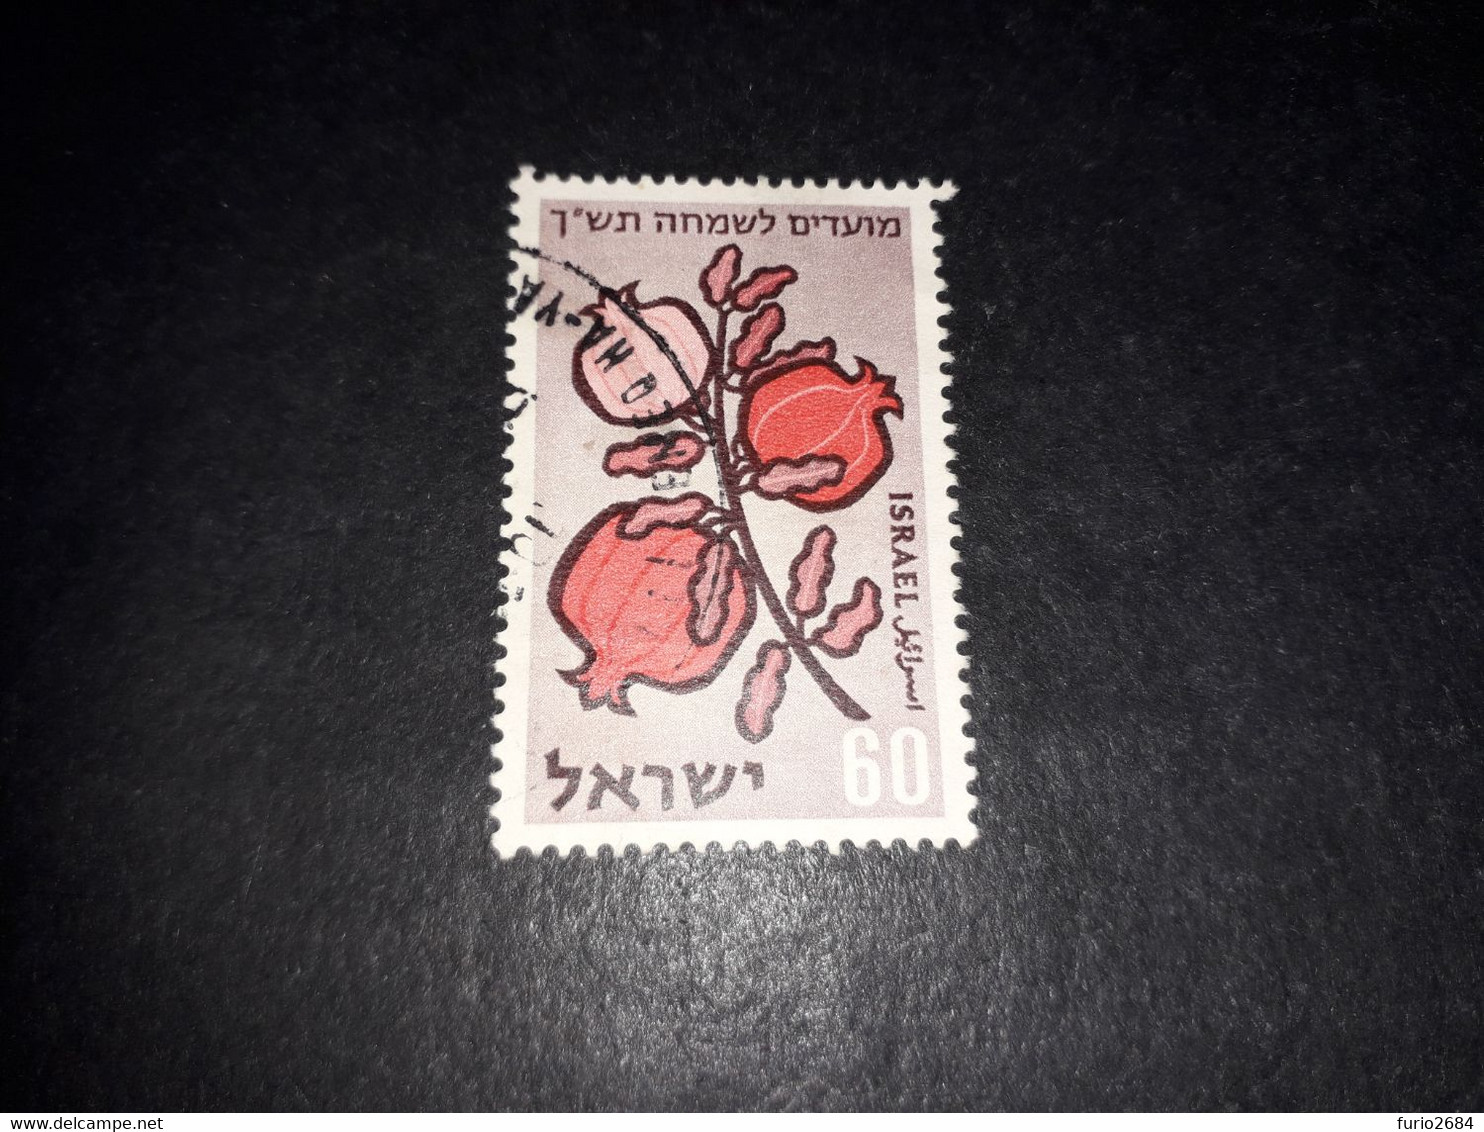 06AL03 ISRAELE 1 VALORE "O" - Used Stamps (without Tabs)